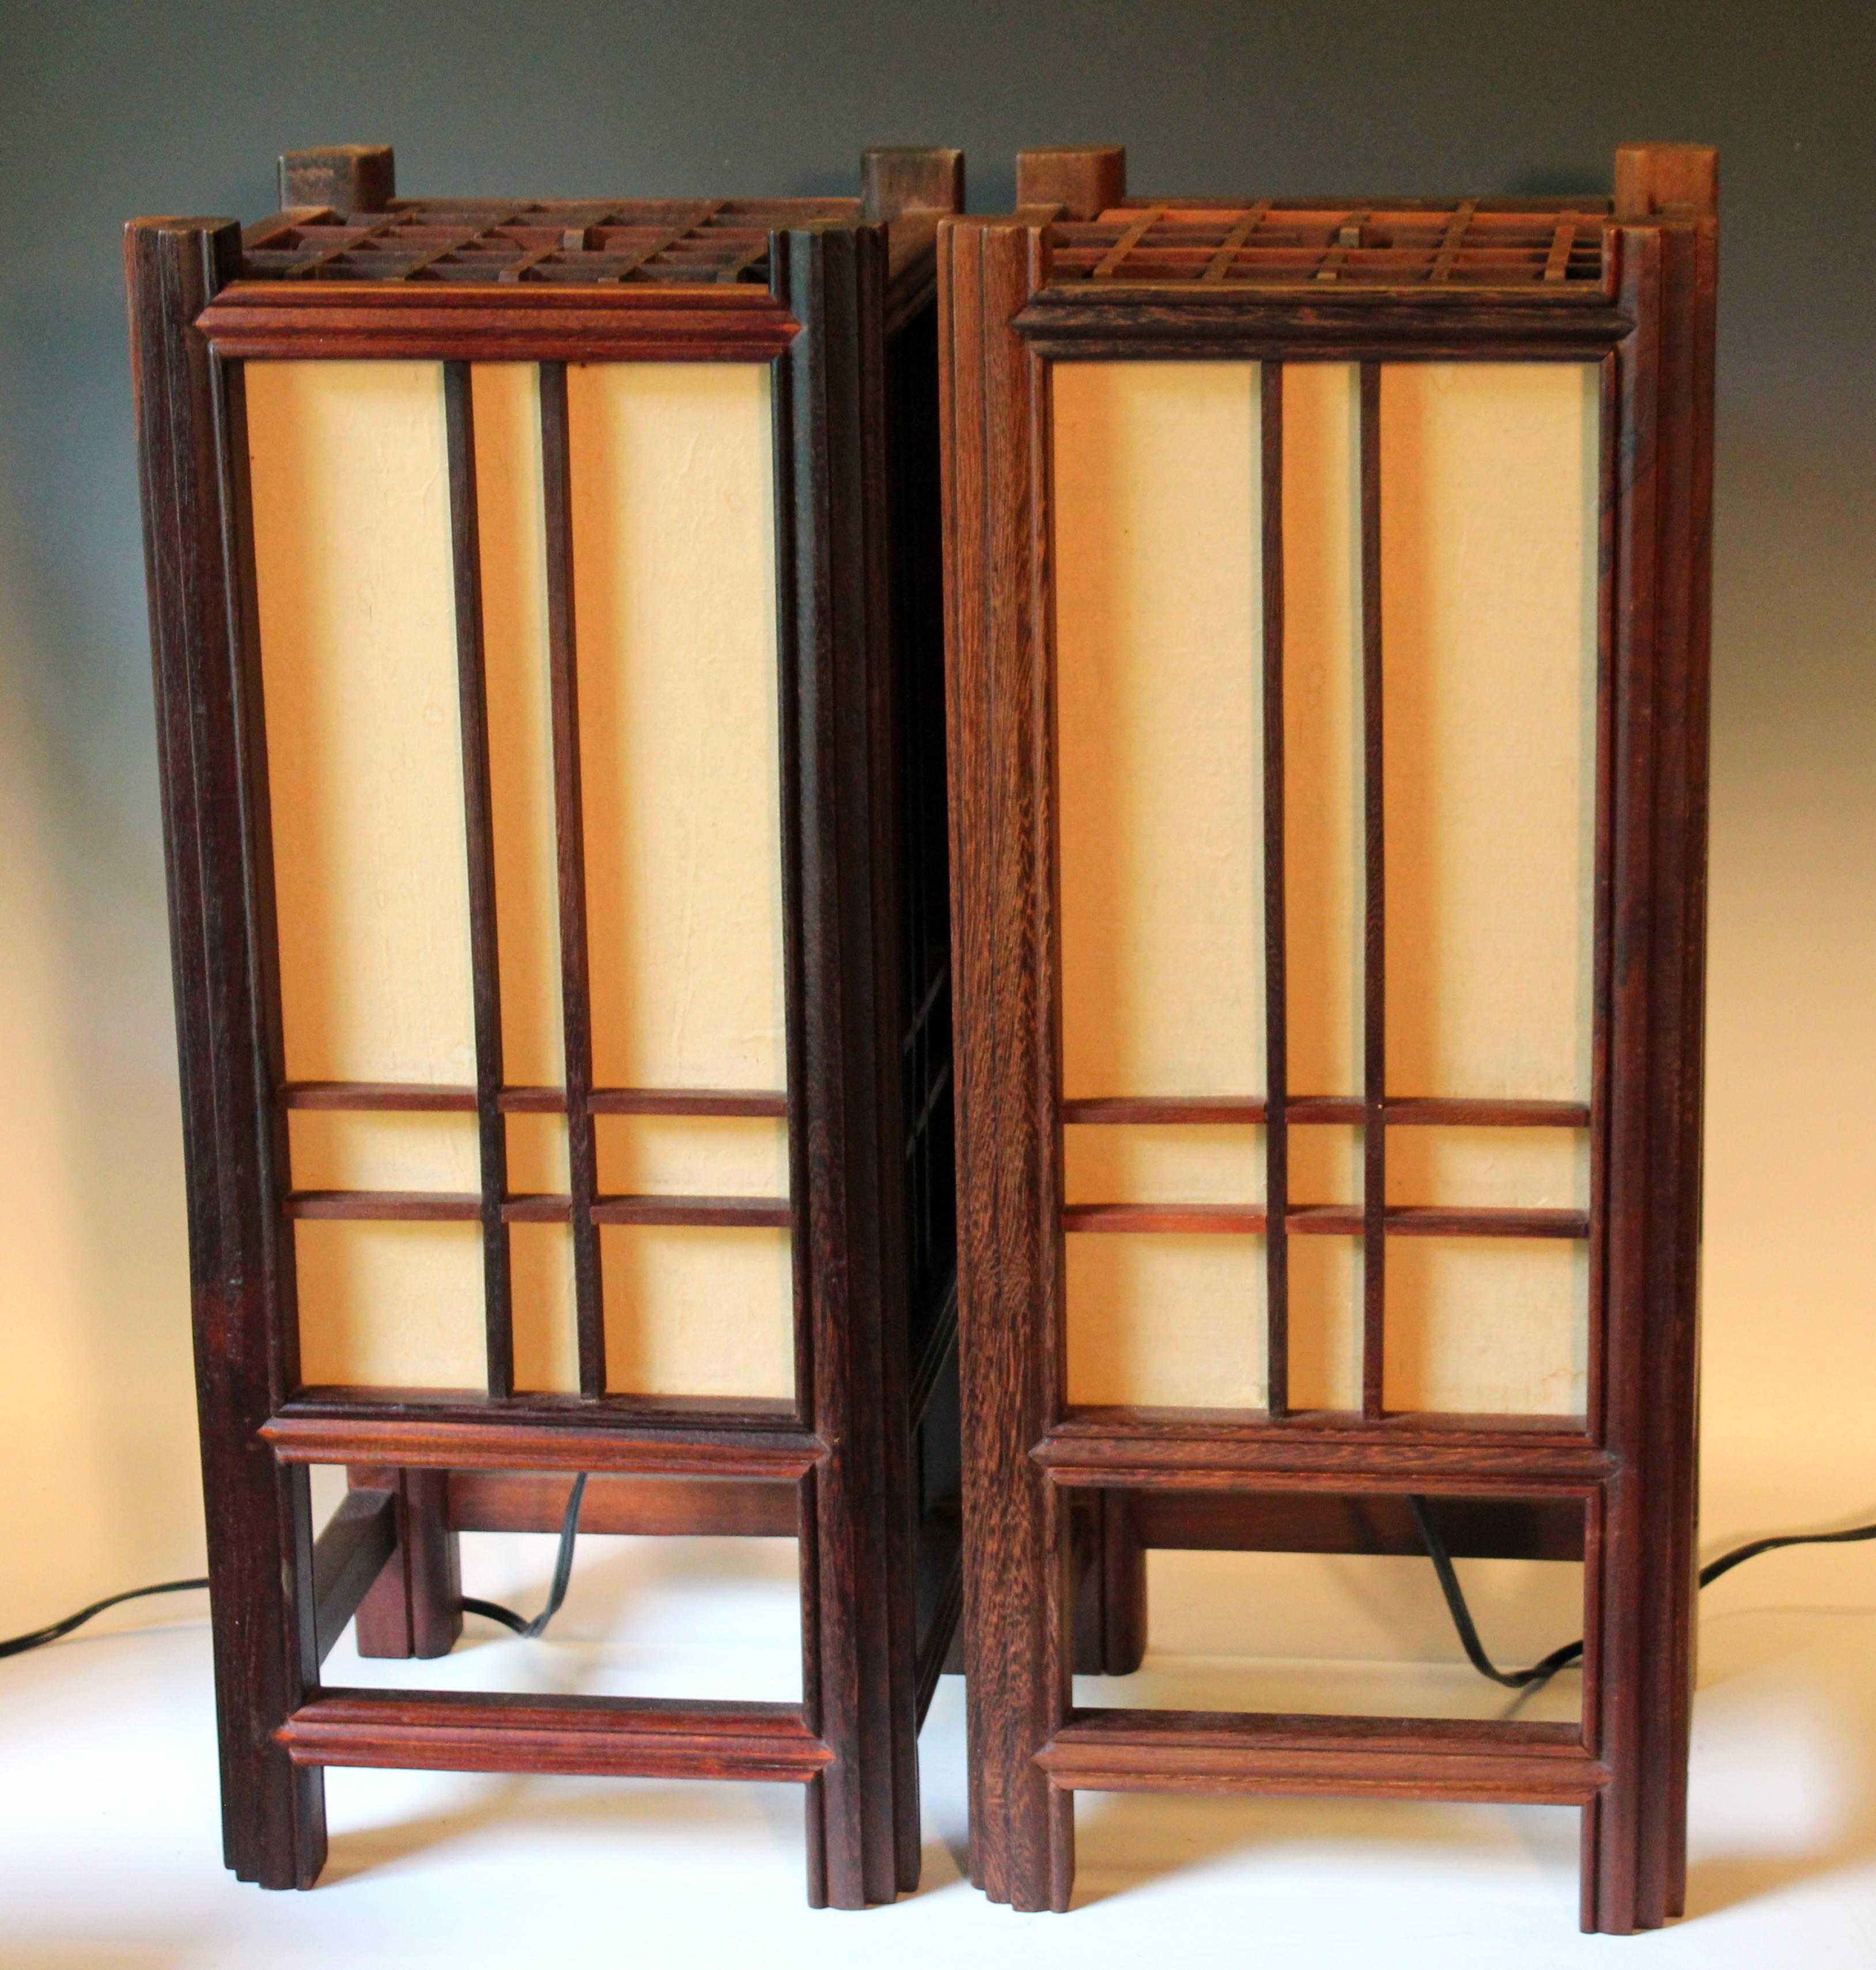 Vintage pair of large Japanese tabletop square rosewood lantern lamps, circa late 20th century. Nice quality with traditional construction, fabric covered plexi windows. Measure: 25" high, 10 5/8" square. Excellent condition, scuffing and